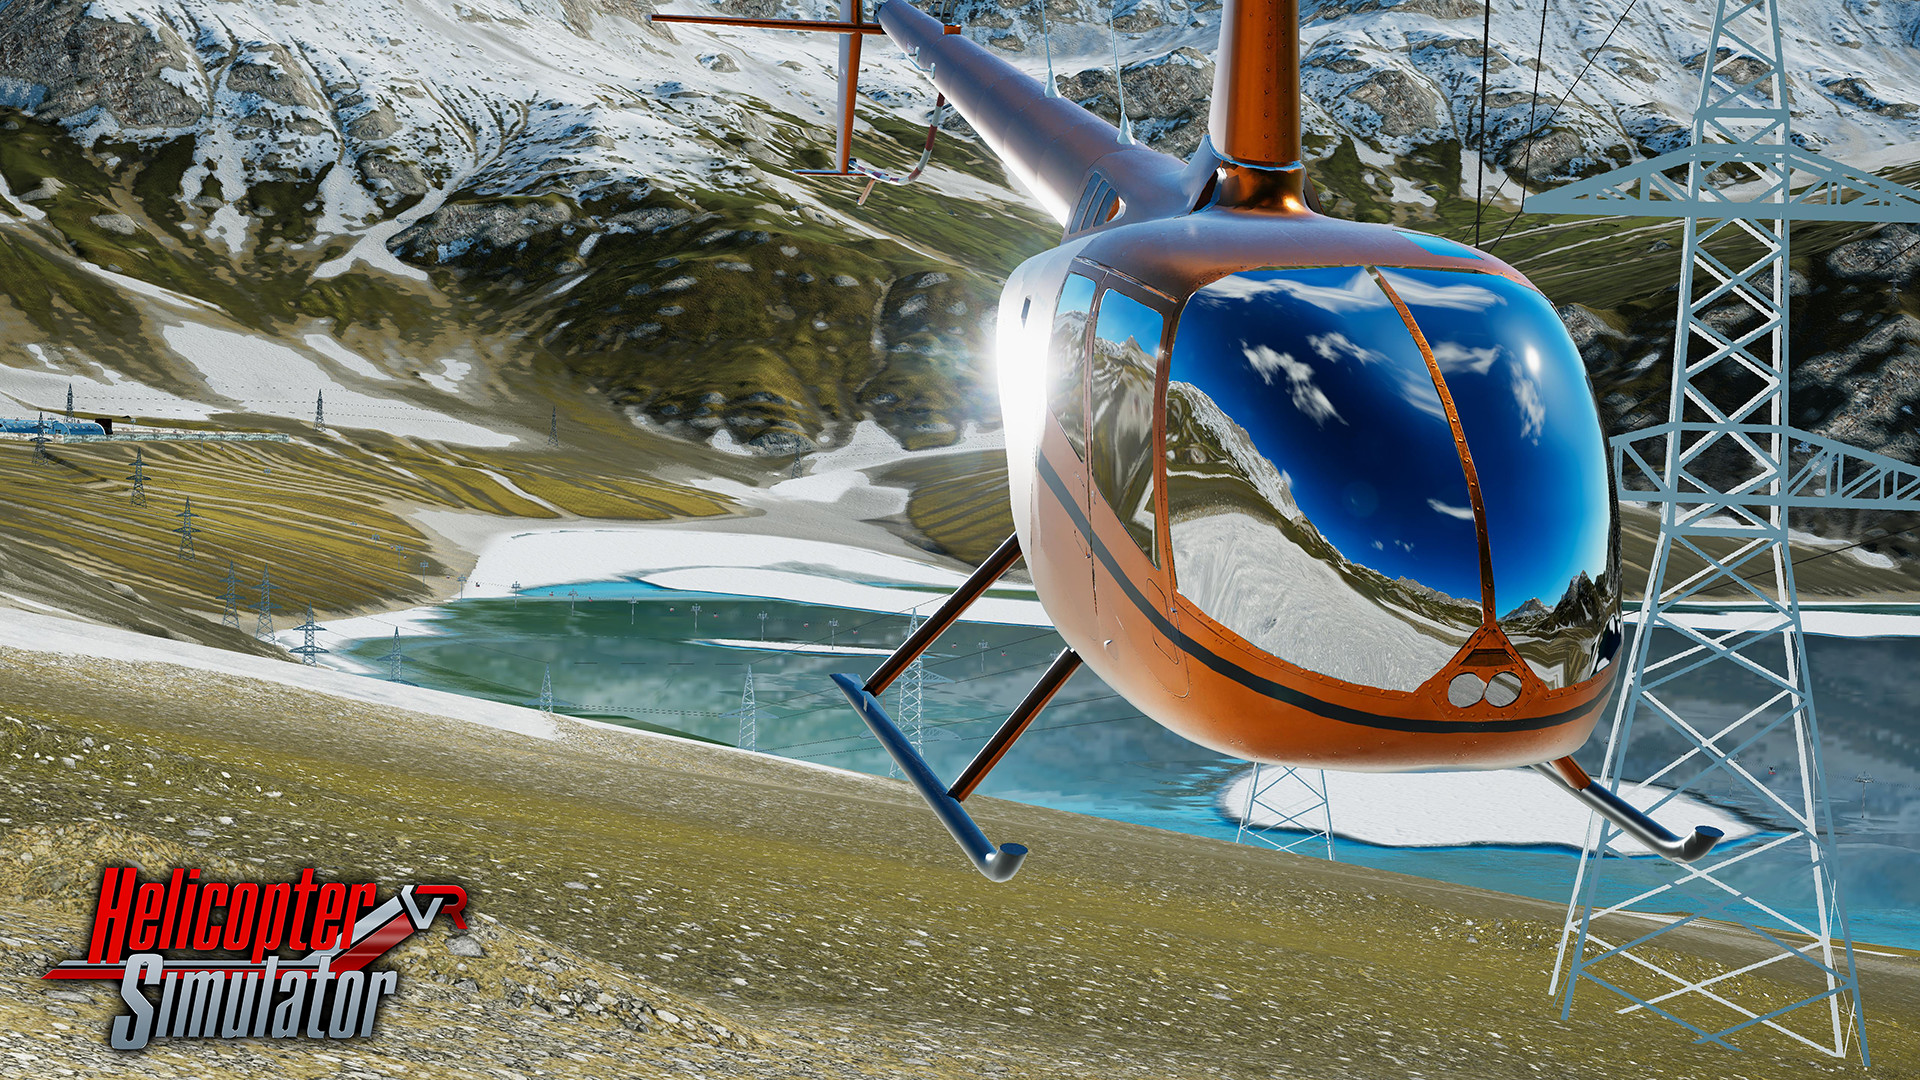 Helicopter Simulator VR 2021 Rescue Missions on